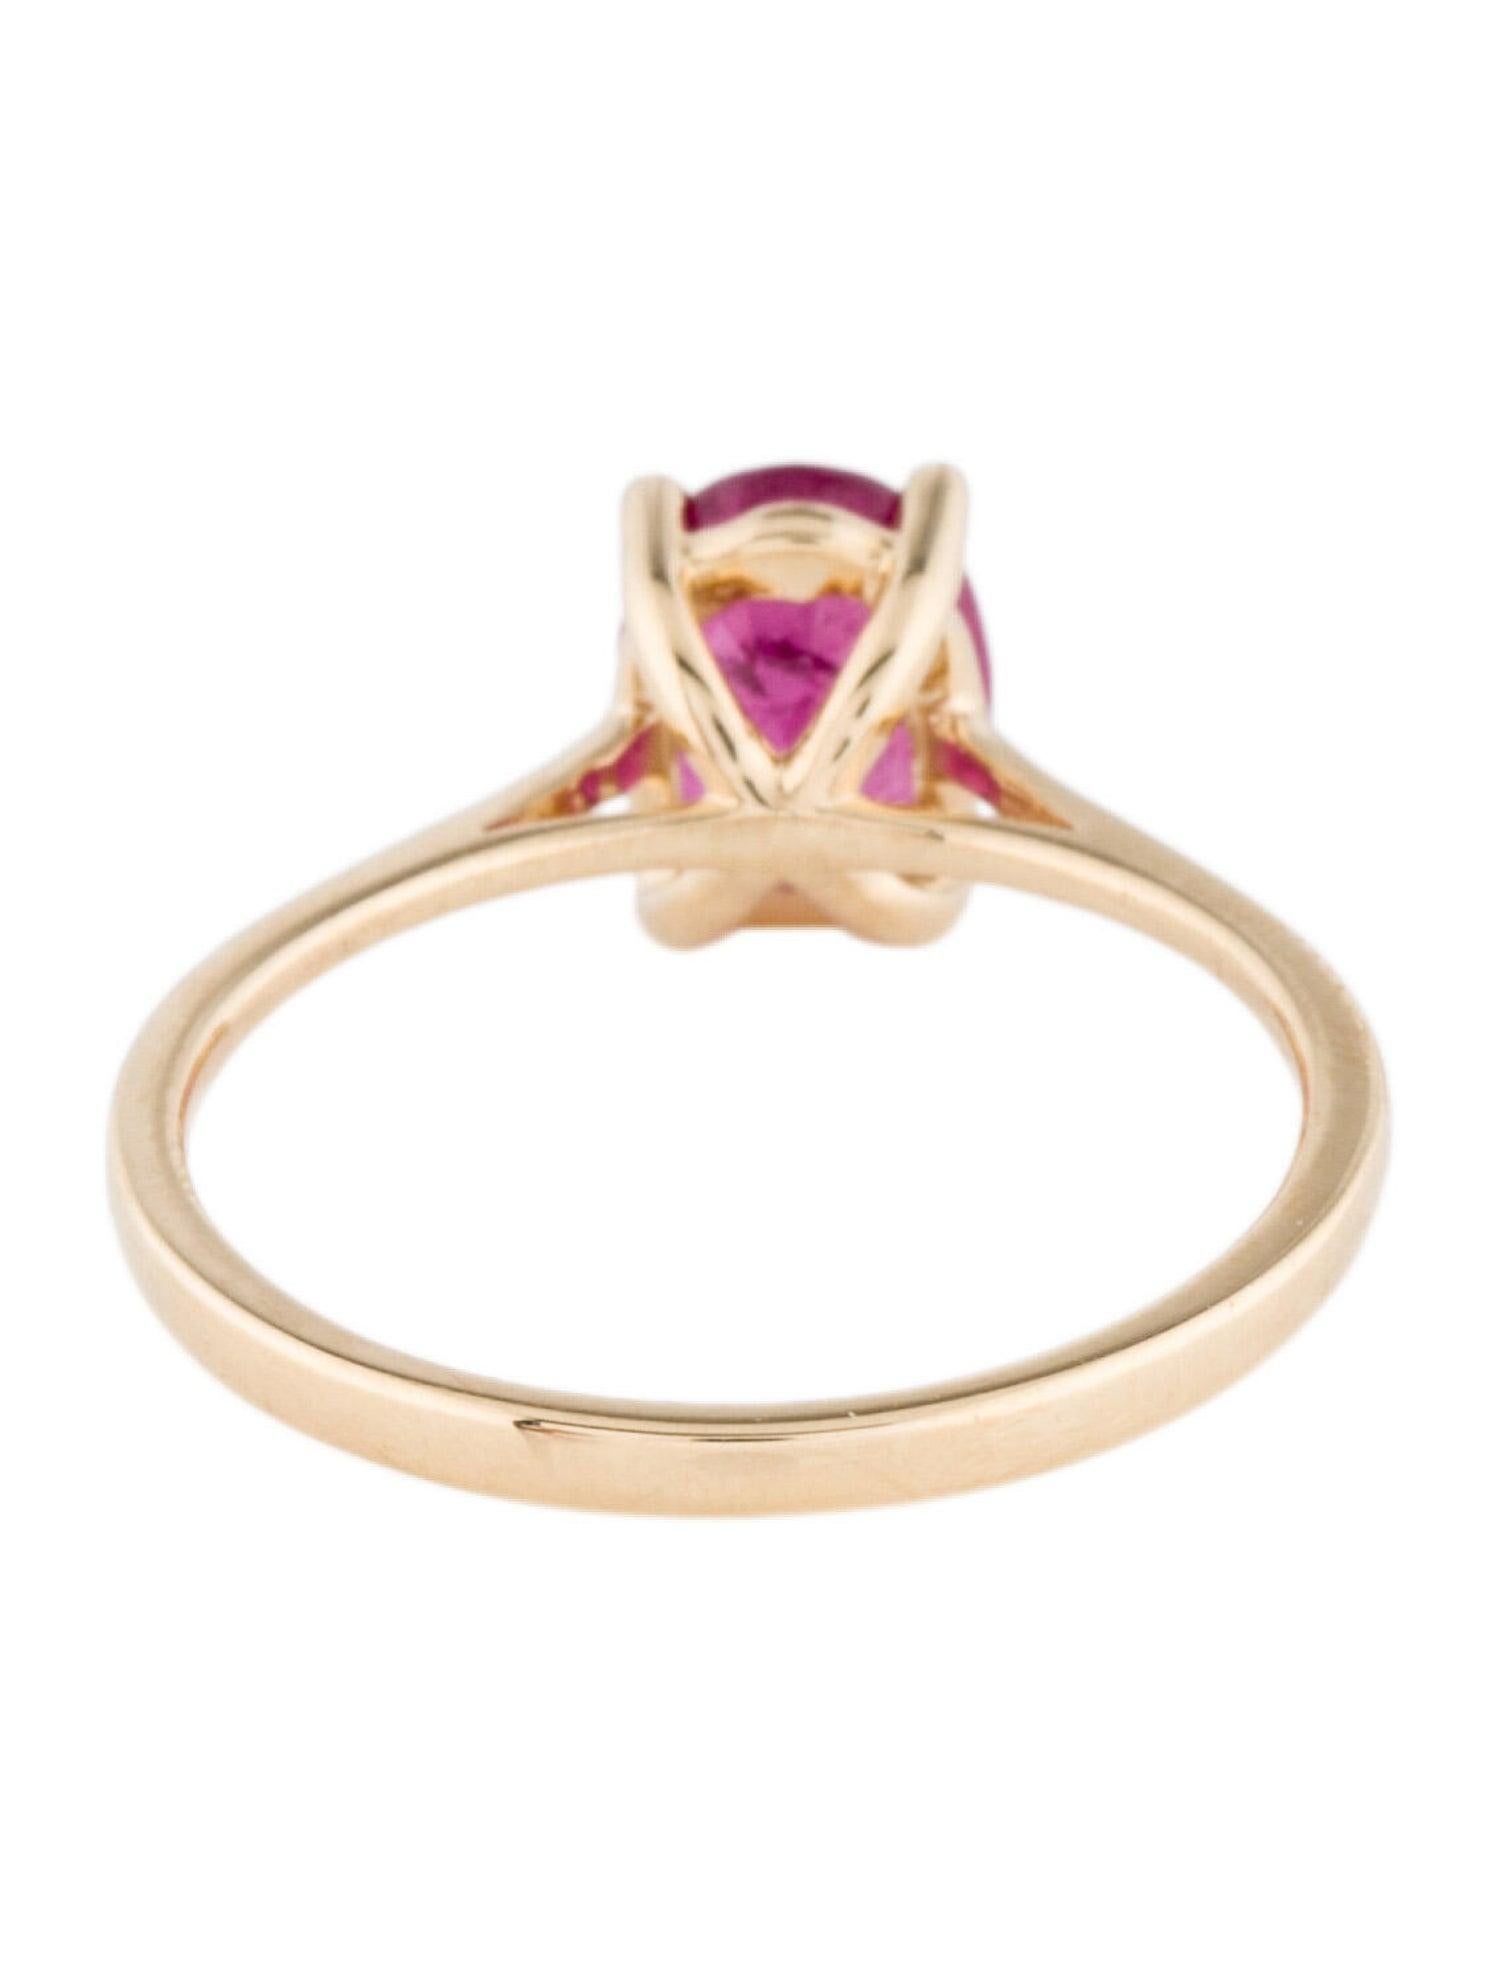 Rose Cut Radiant 14K 1.26ct Tourmaline Solitaire Cocktail Ring - Size 7 - Timeless For Sale